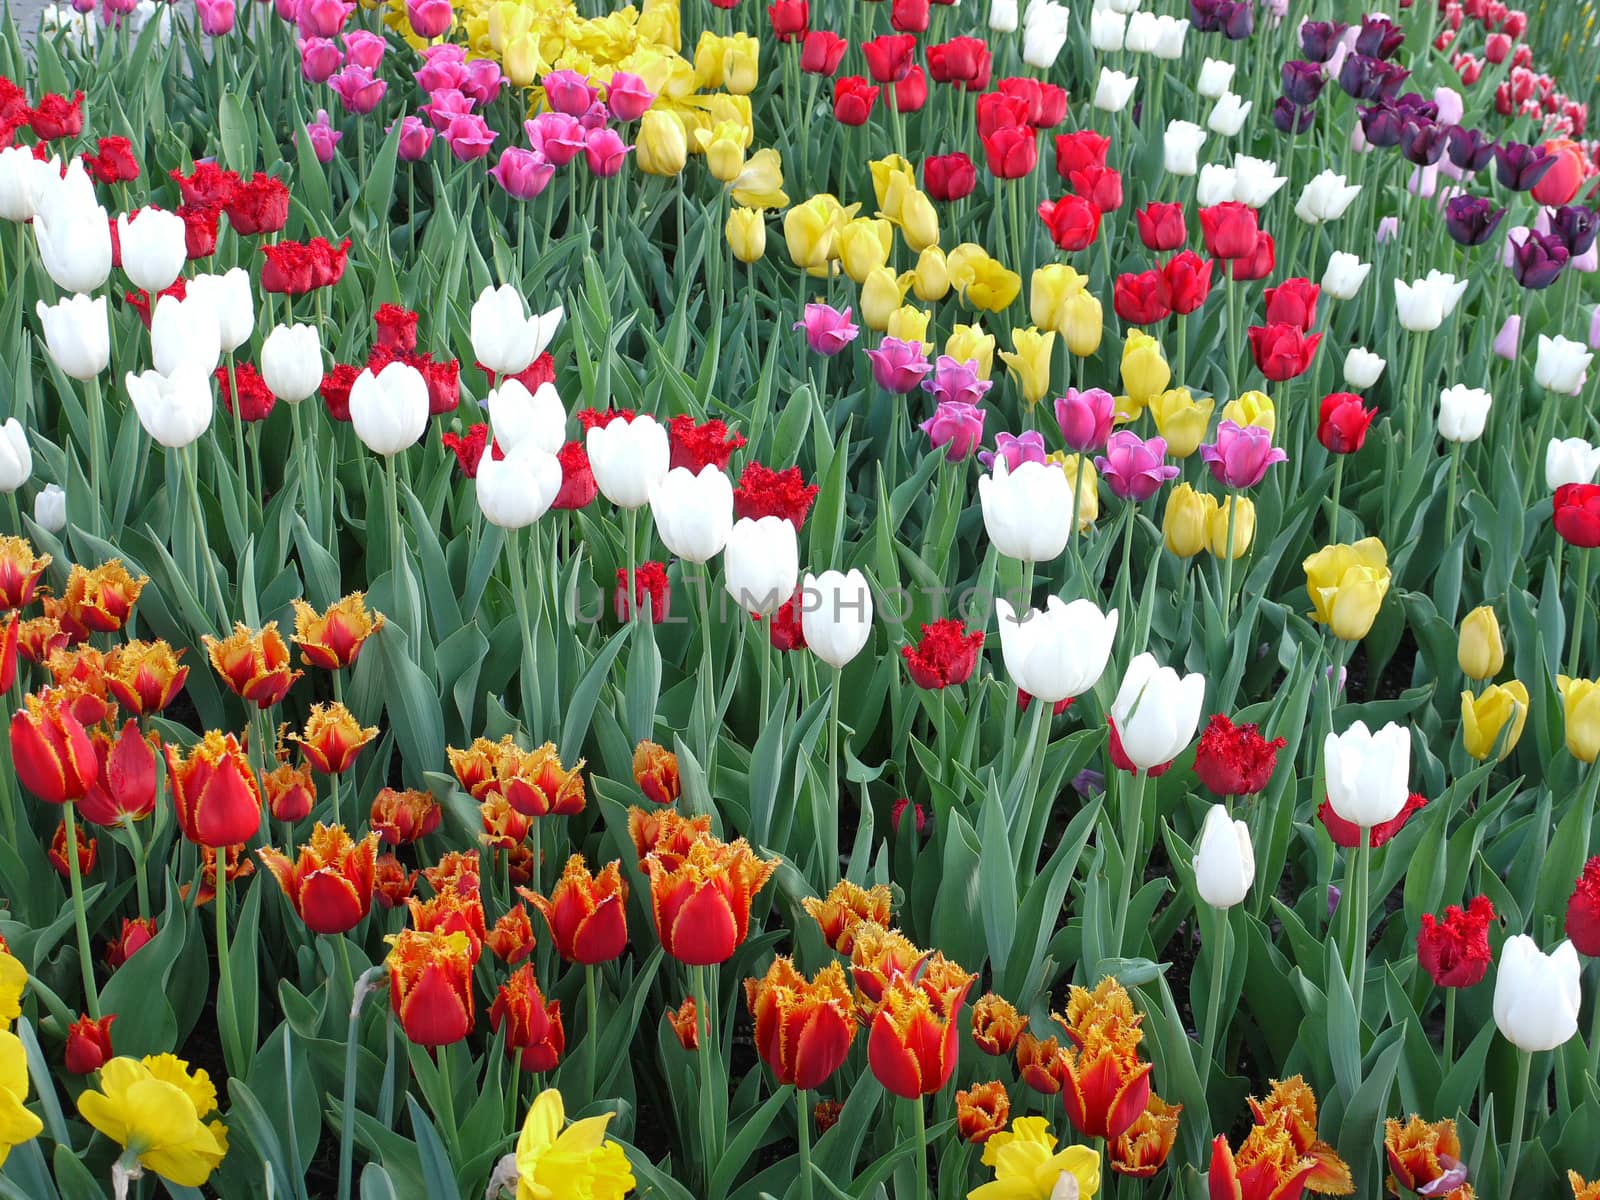 elegant and unsurpassed tulips on the flower bed for every taste and color